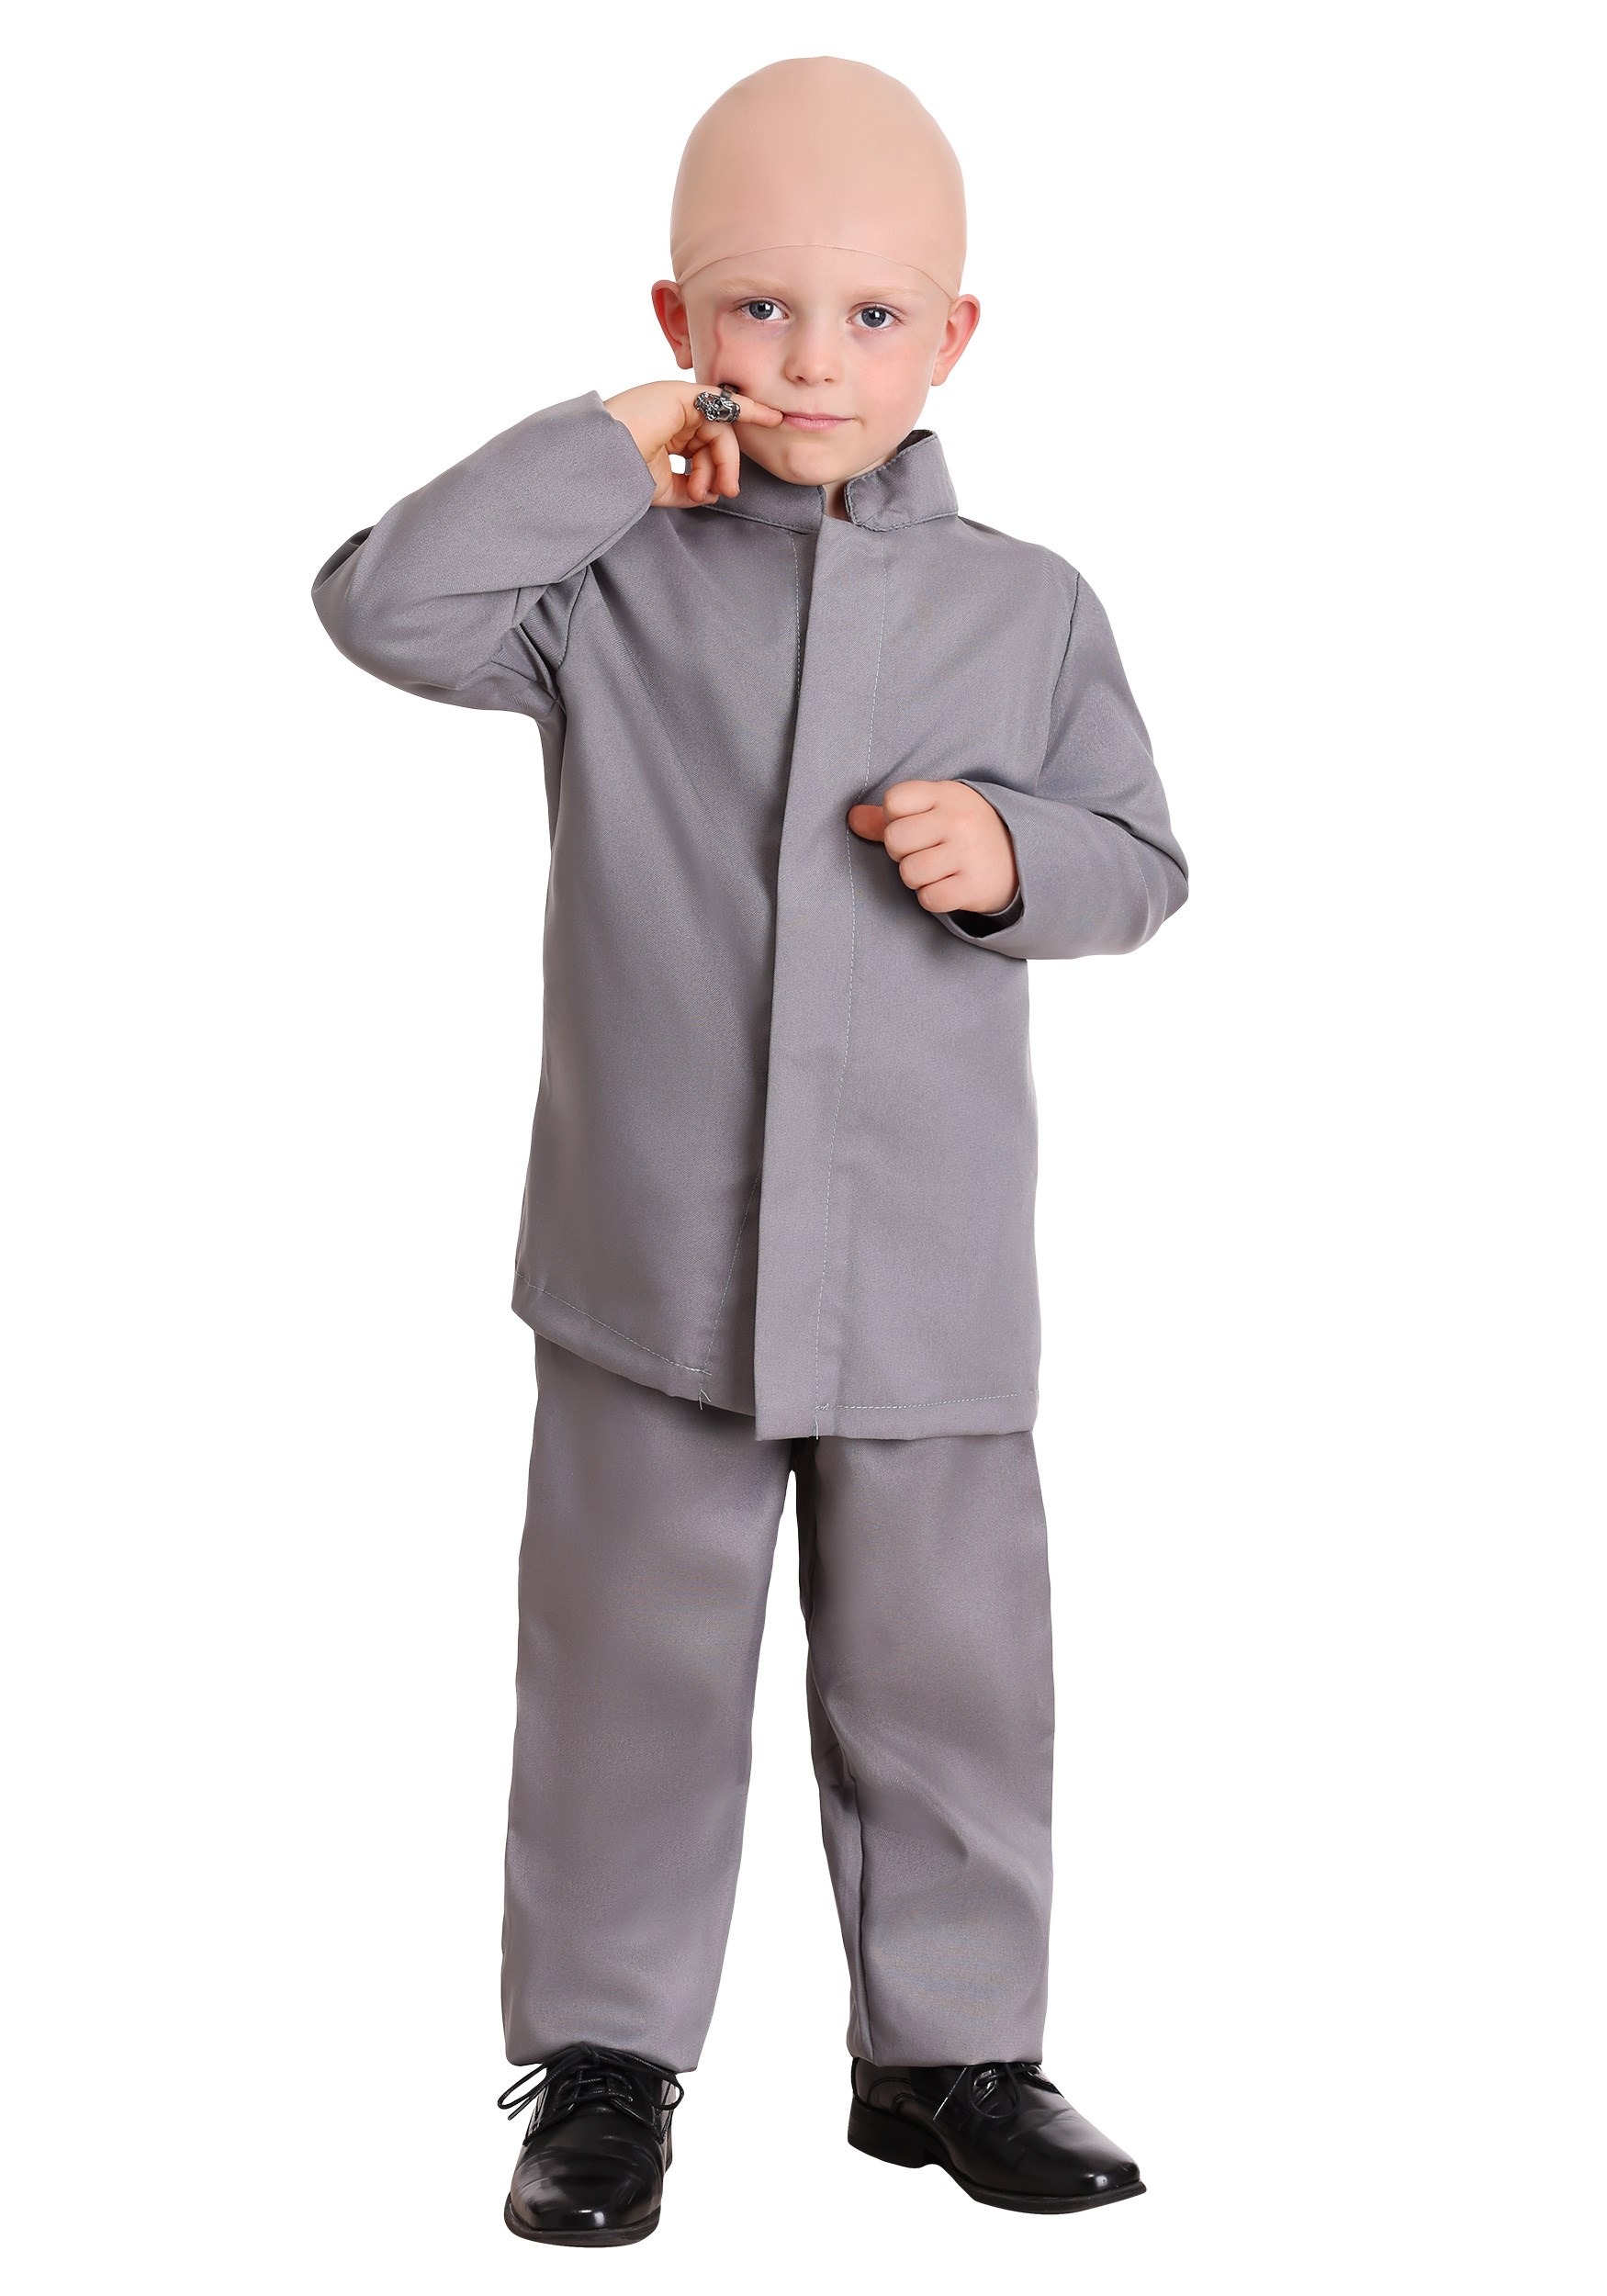 Toddlers Gray Suit Costume